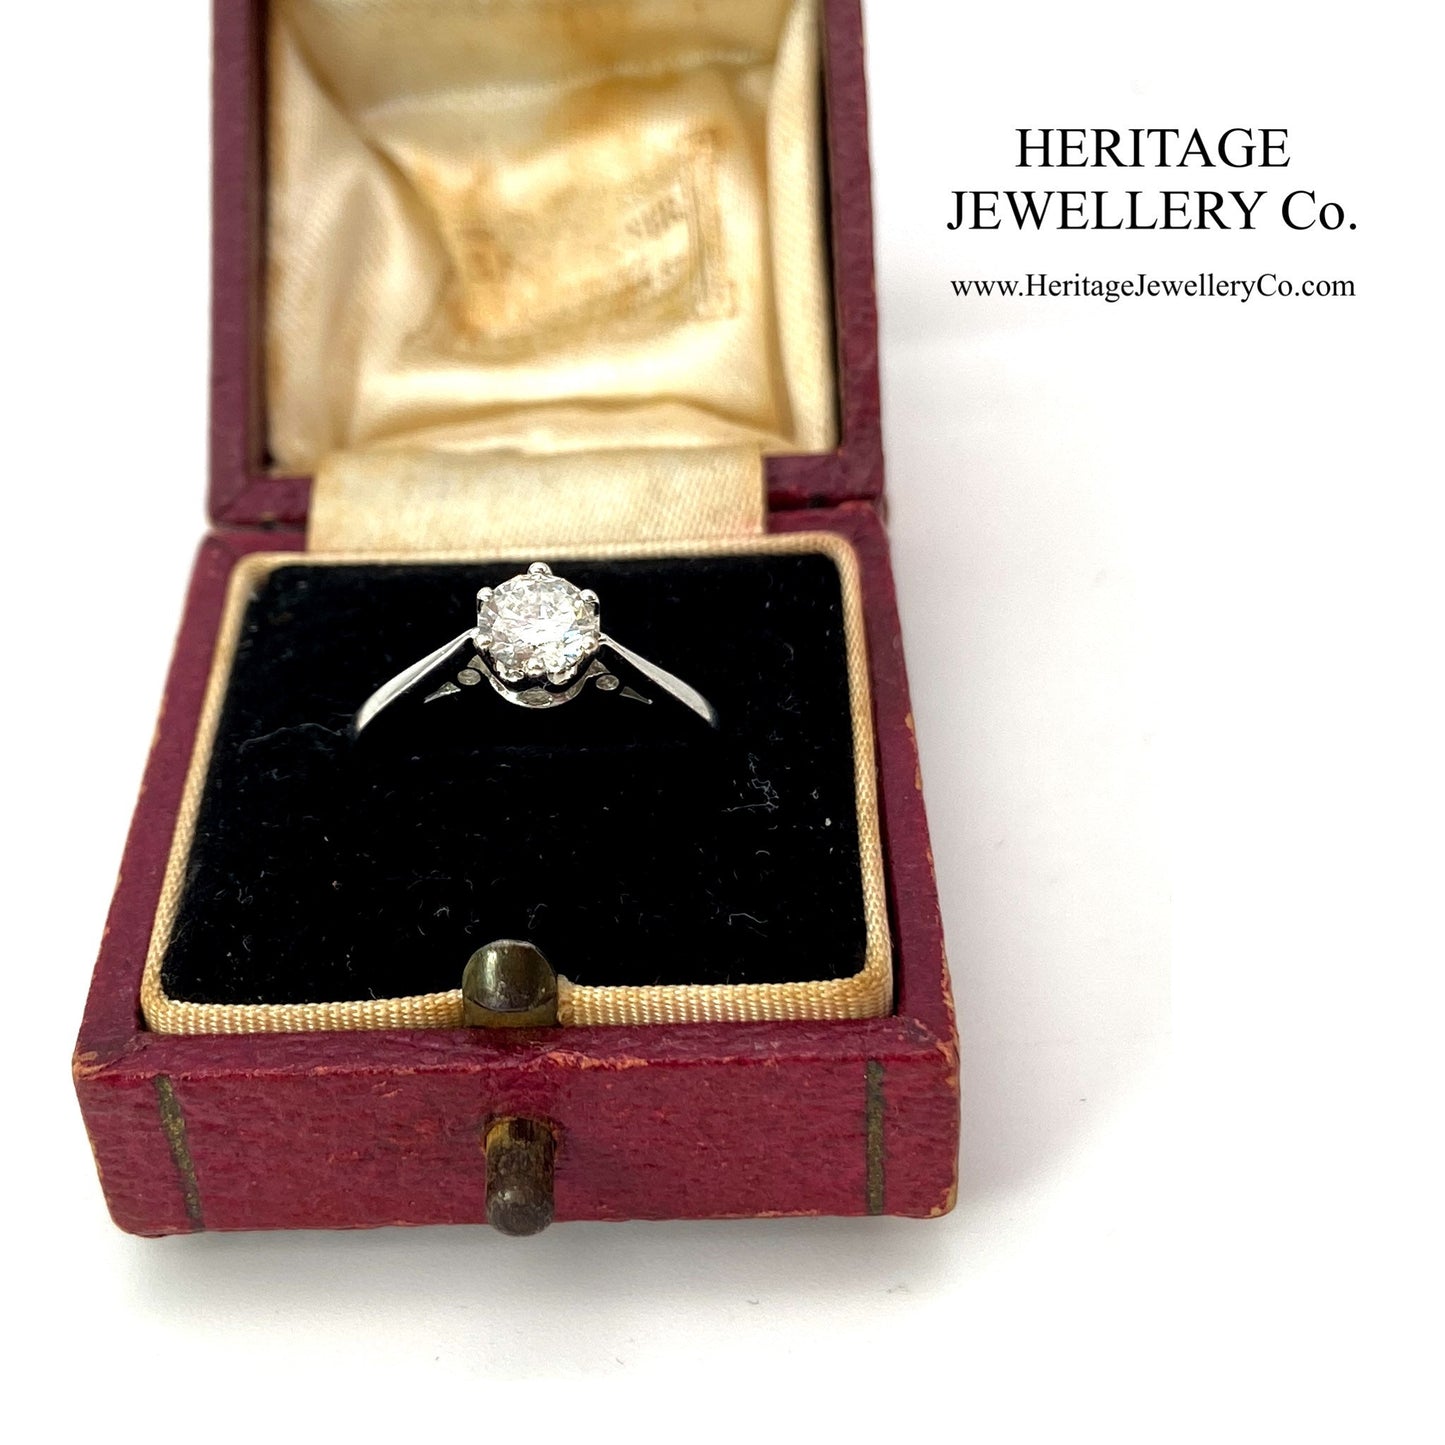 Vintage White Gold 0.50ct Diamond Solitaire Ring